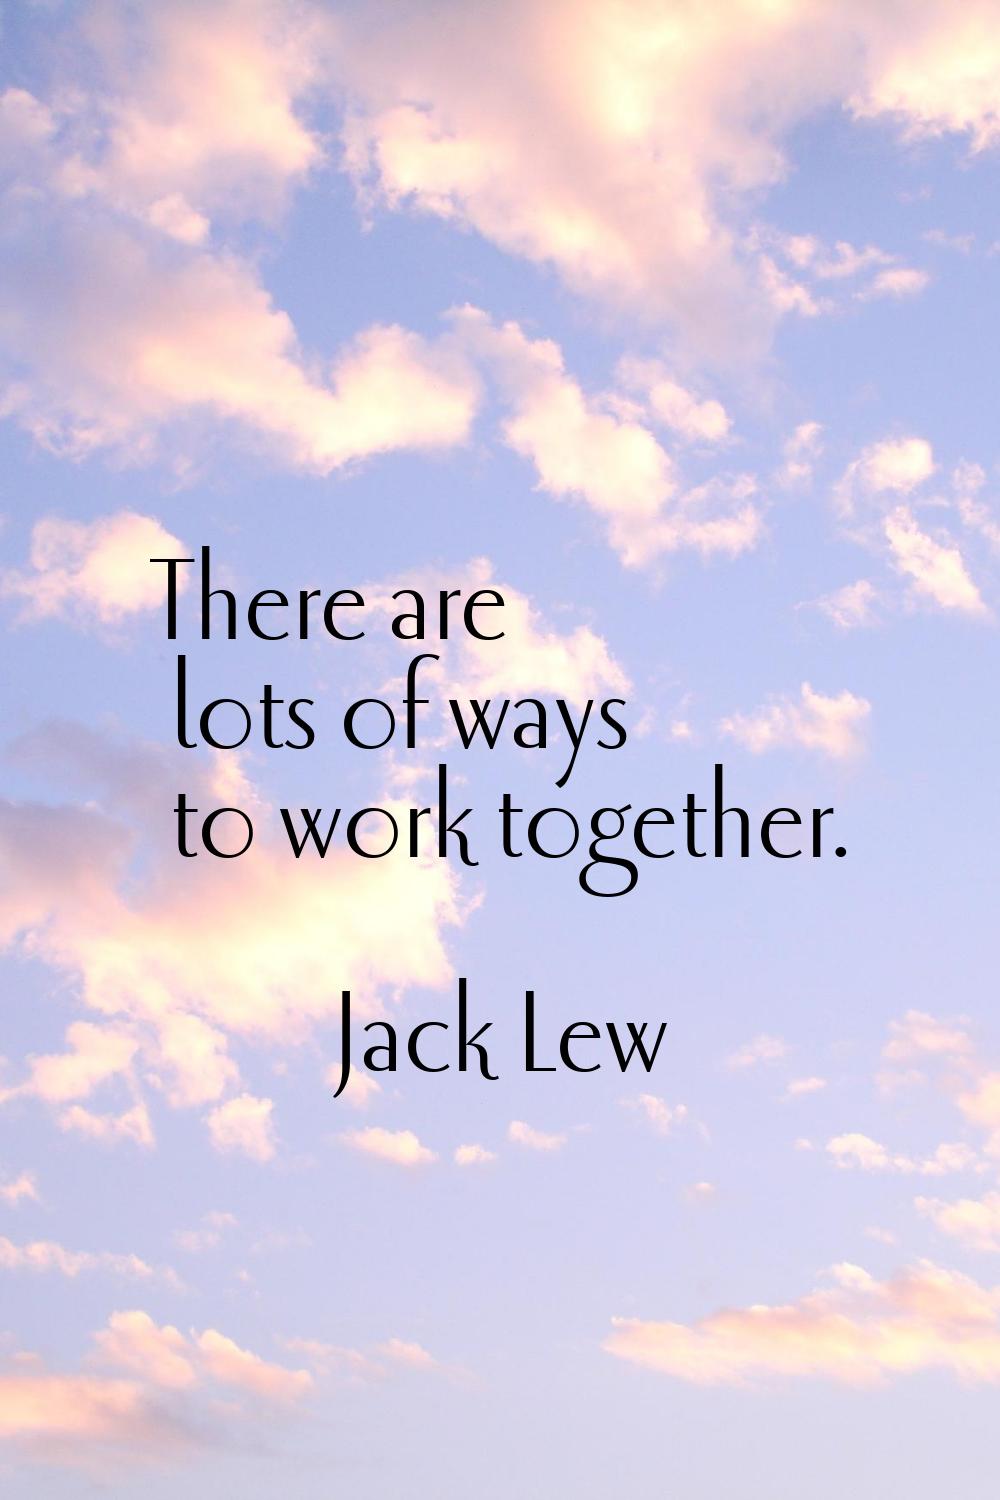 There are lots of ways to work together.